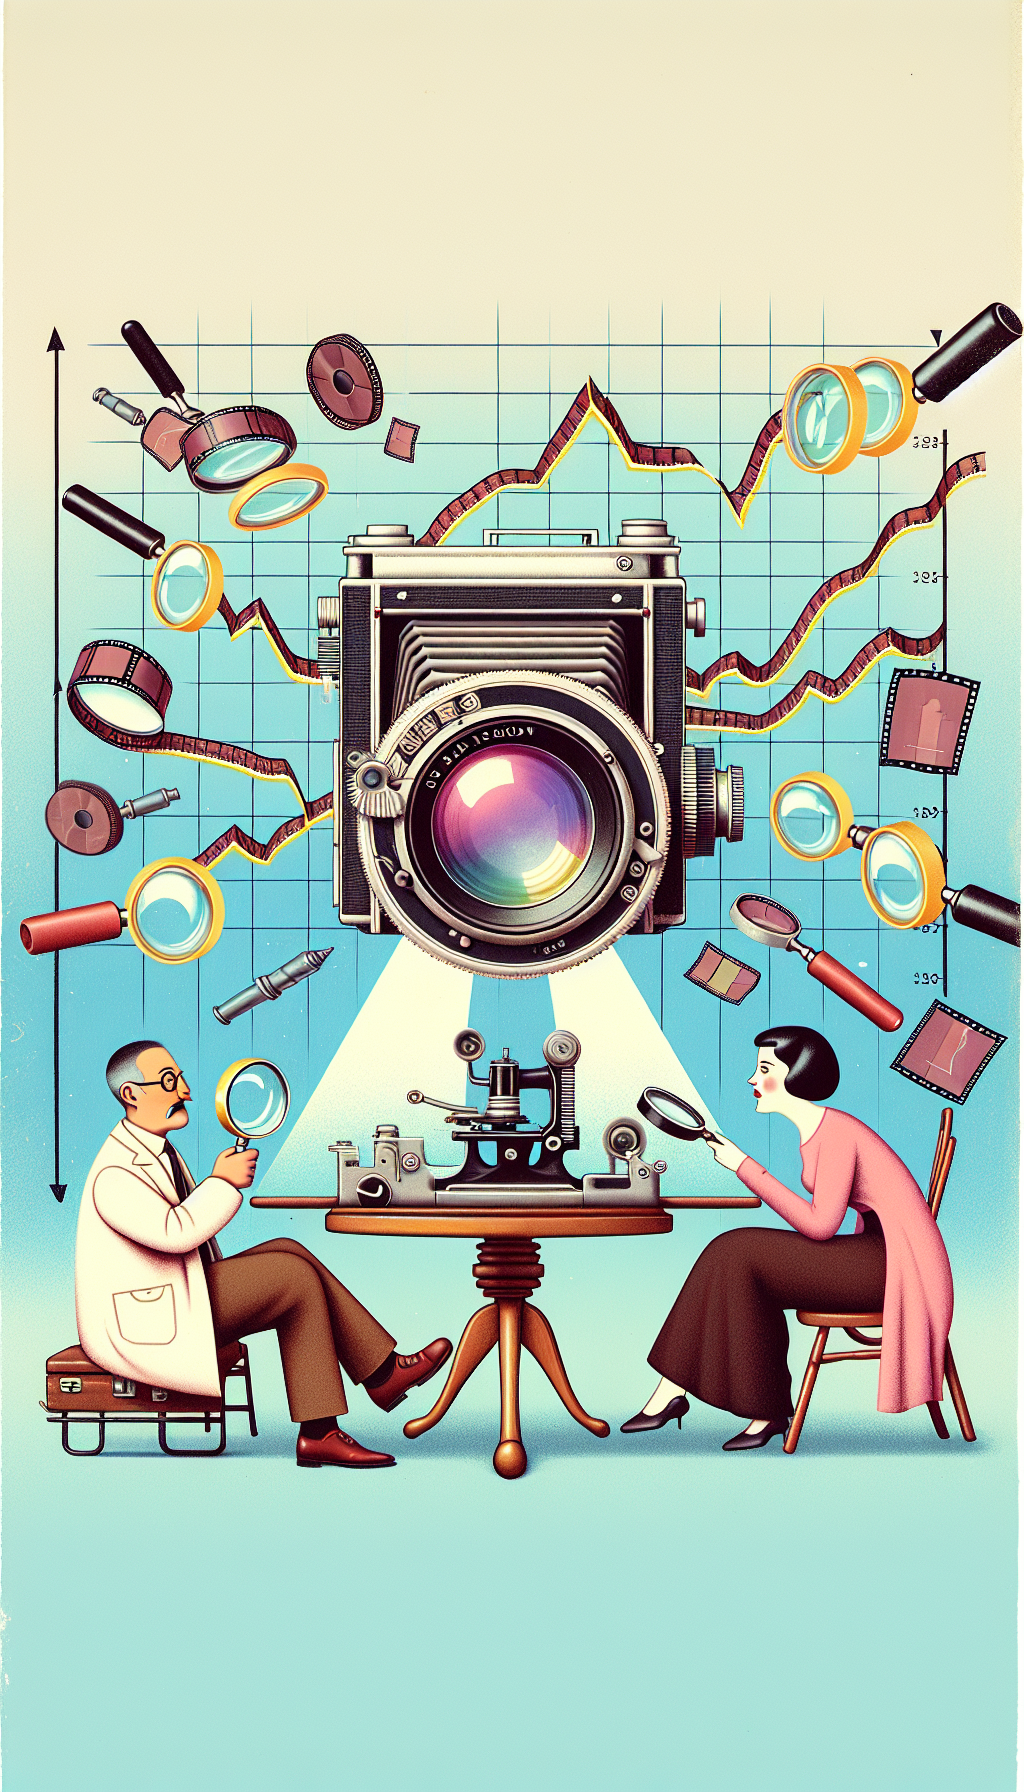 A whimsical, pastel-colored illustration depicts an antique camera atop a soaring graph line made of film strips, with magnifying glasses peering in and little caricatured experts debating beneath. A scatter of vintage price tags floats around, symbolizing fluctuating market values, while the camera lens reflects ephemeral market trend data.